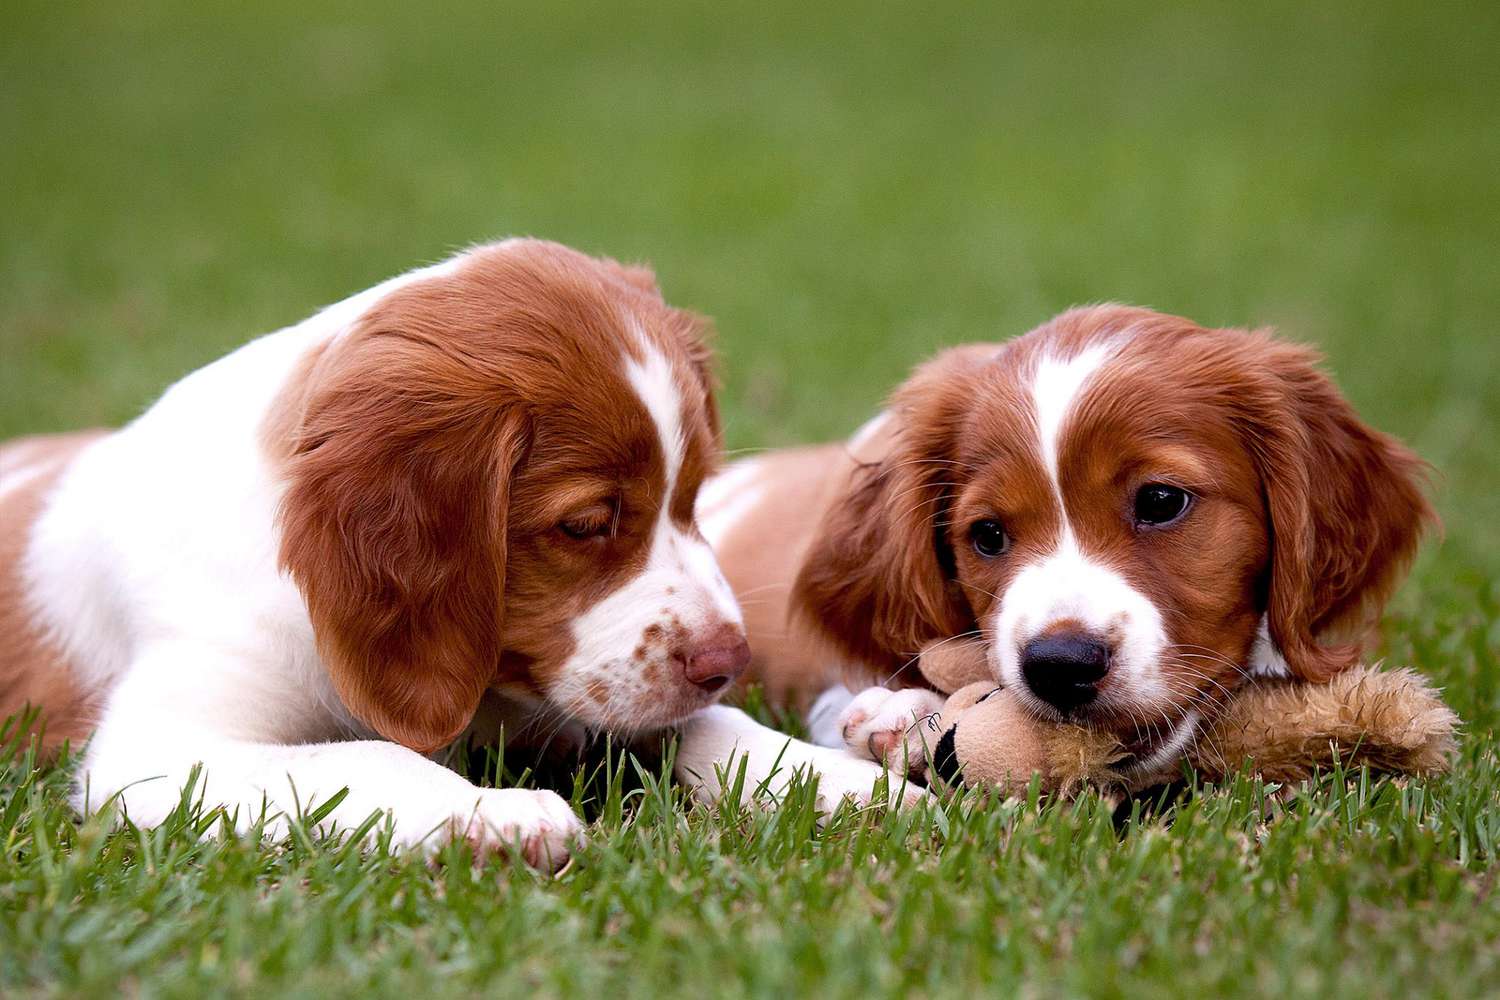 Two brittany spaniel puppies play in grass with dog toy